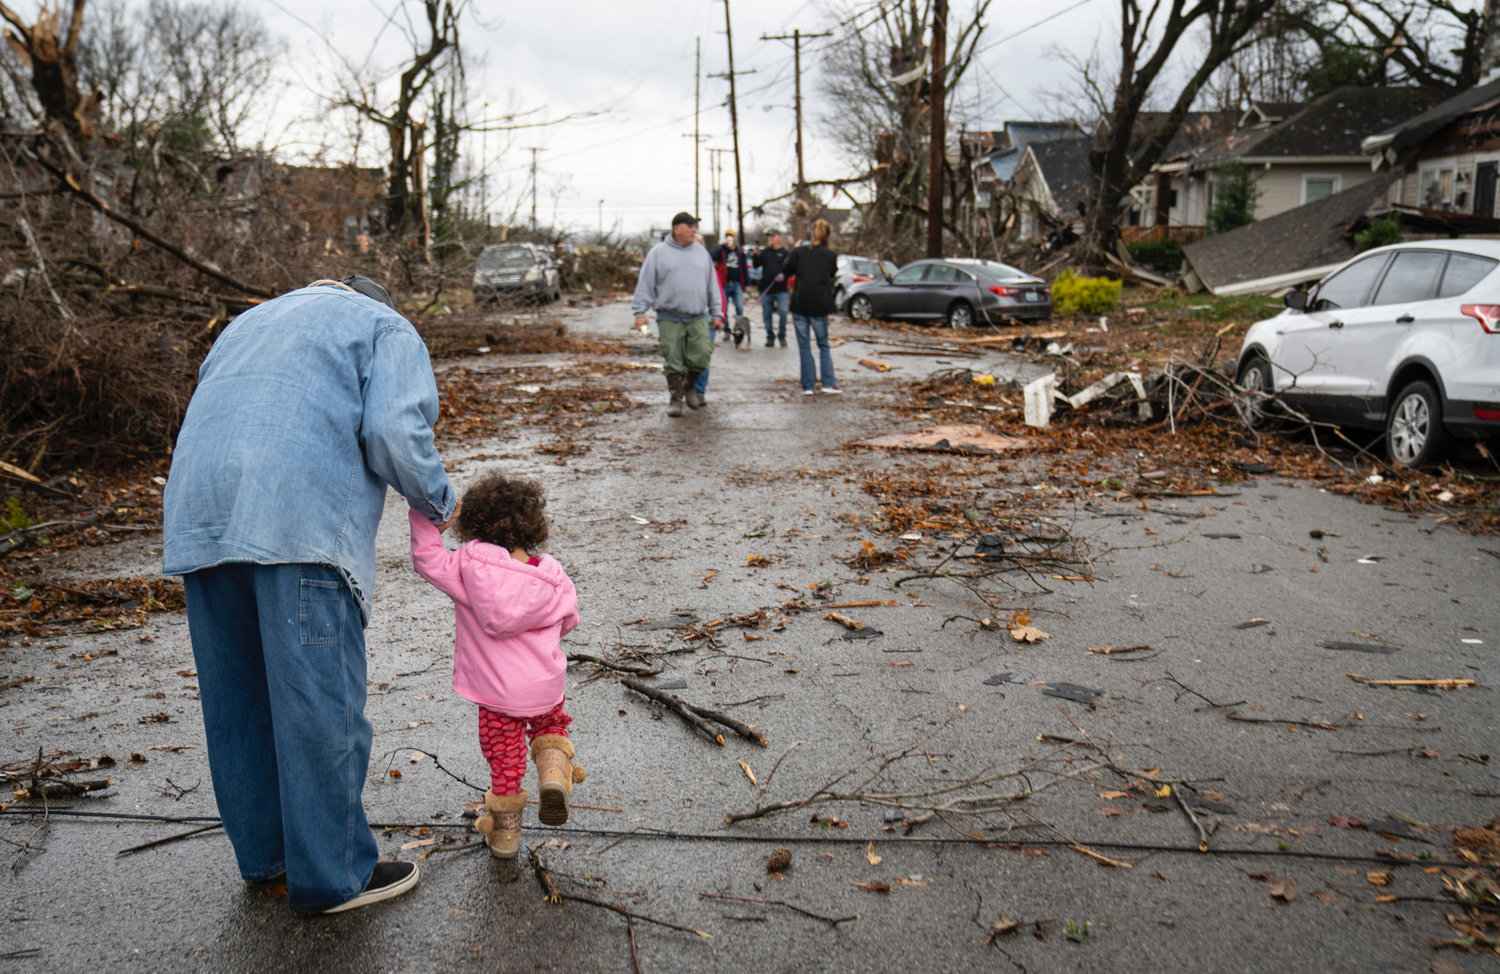 Residents of Bowling Green, Ky., survey damage on a neighborhood street. Severe storms ripped through five states killing dozens of people in the wee hours of Saturday morning.
This photo is being used for non-commercial purpose and not in connection with selling a good or service.